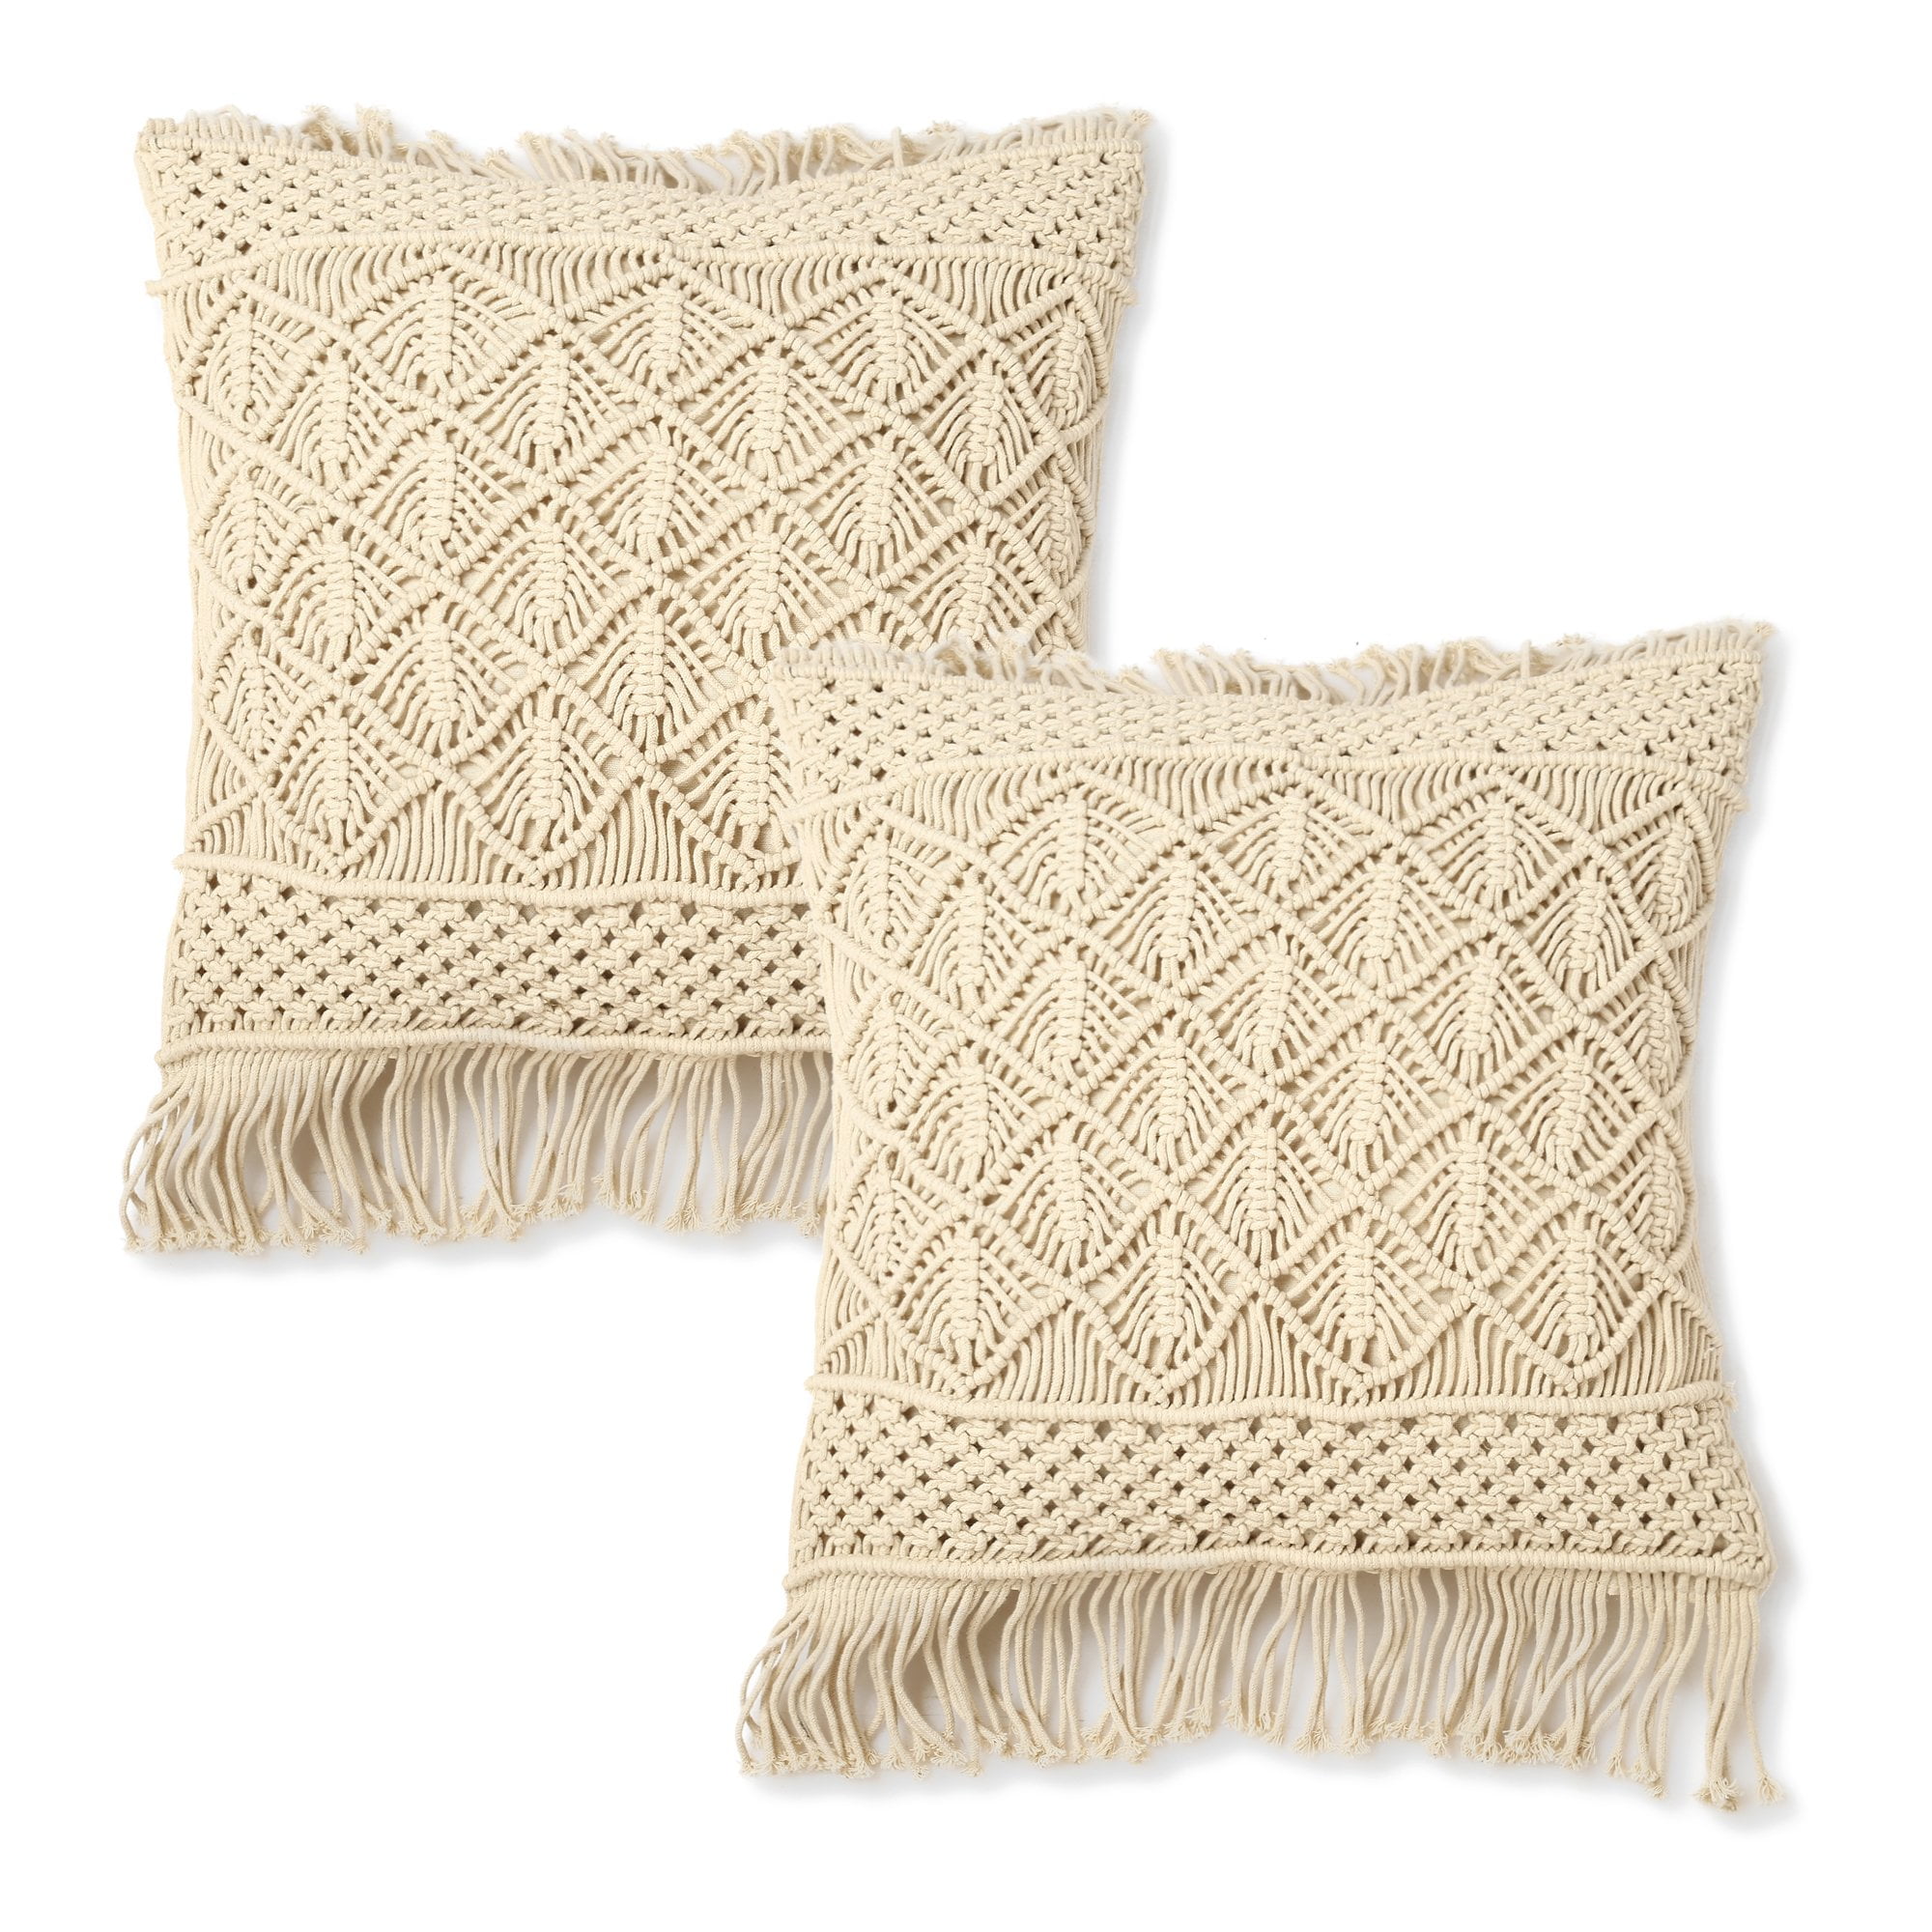 REDEARTH Tufted Throw Pillow Cushion Covers-Boho Textured Woven Decorative  Cases Set for Couch, Sofa, Bed, Farmhouse, Chair, Dining, Patio, Outdoor,  car; 100% Cotton 18x18; Natural Pack of 2